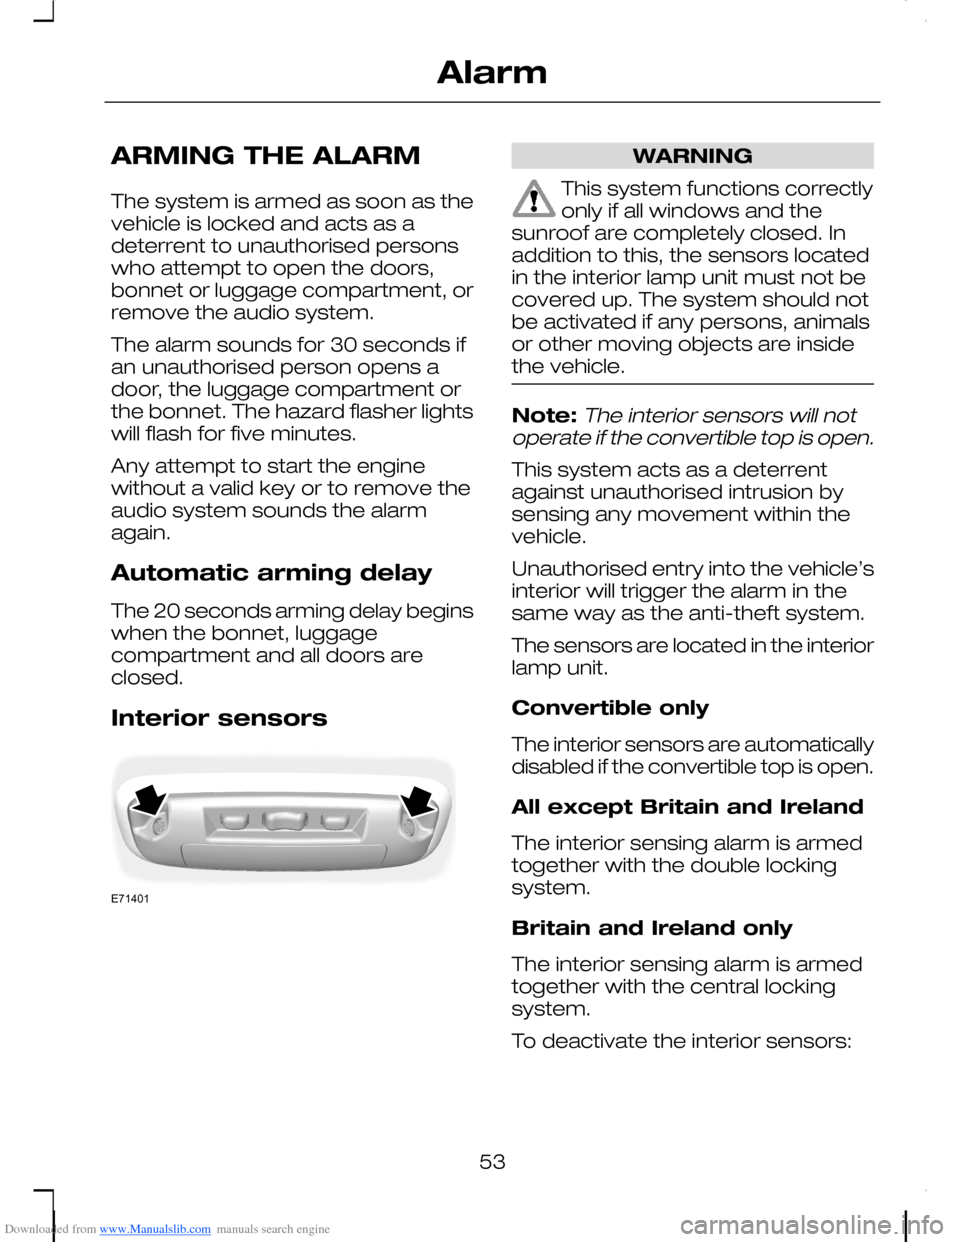 FORD C MAX 2008 1.G Owners Manual Downloaded from www.Manualslib.com manuals search engine ARMING THE ALARM
The system is armed as soon as thevehicle is locked and acts as adeterrent to unauthorised personswho attempt to open the door